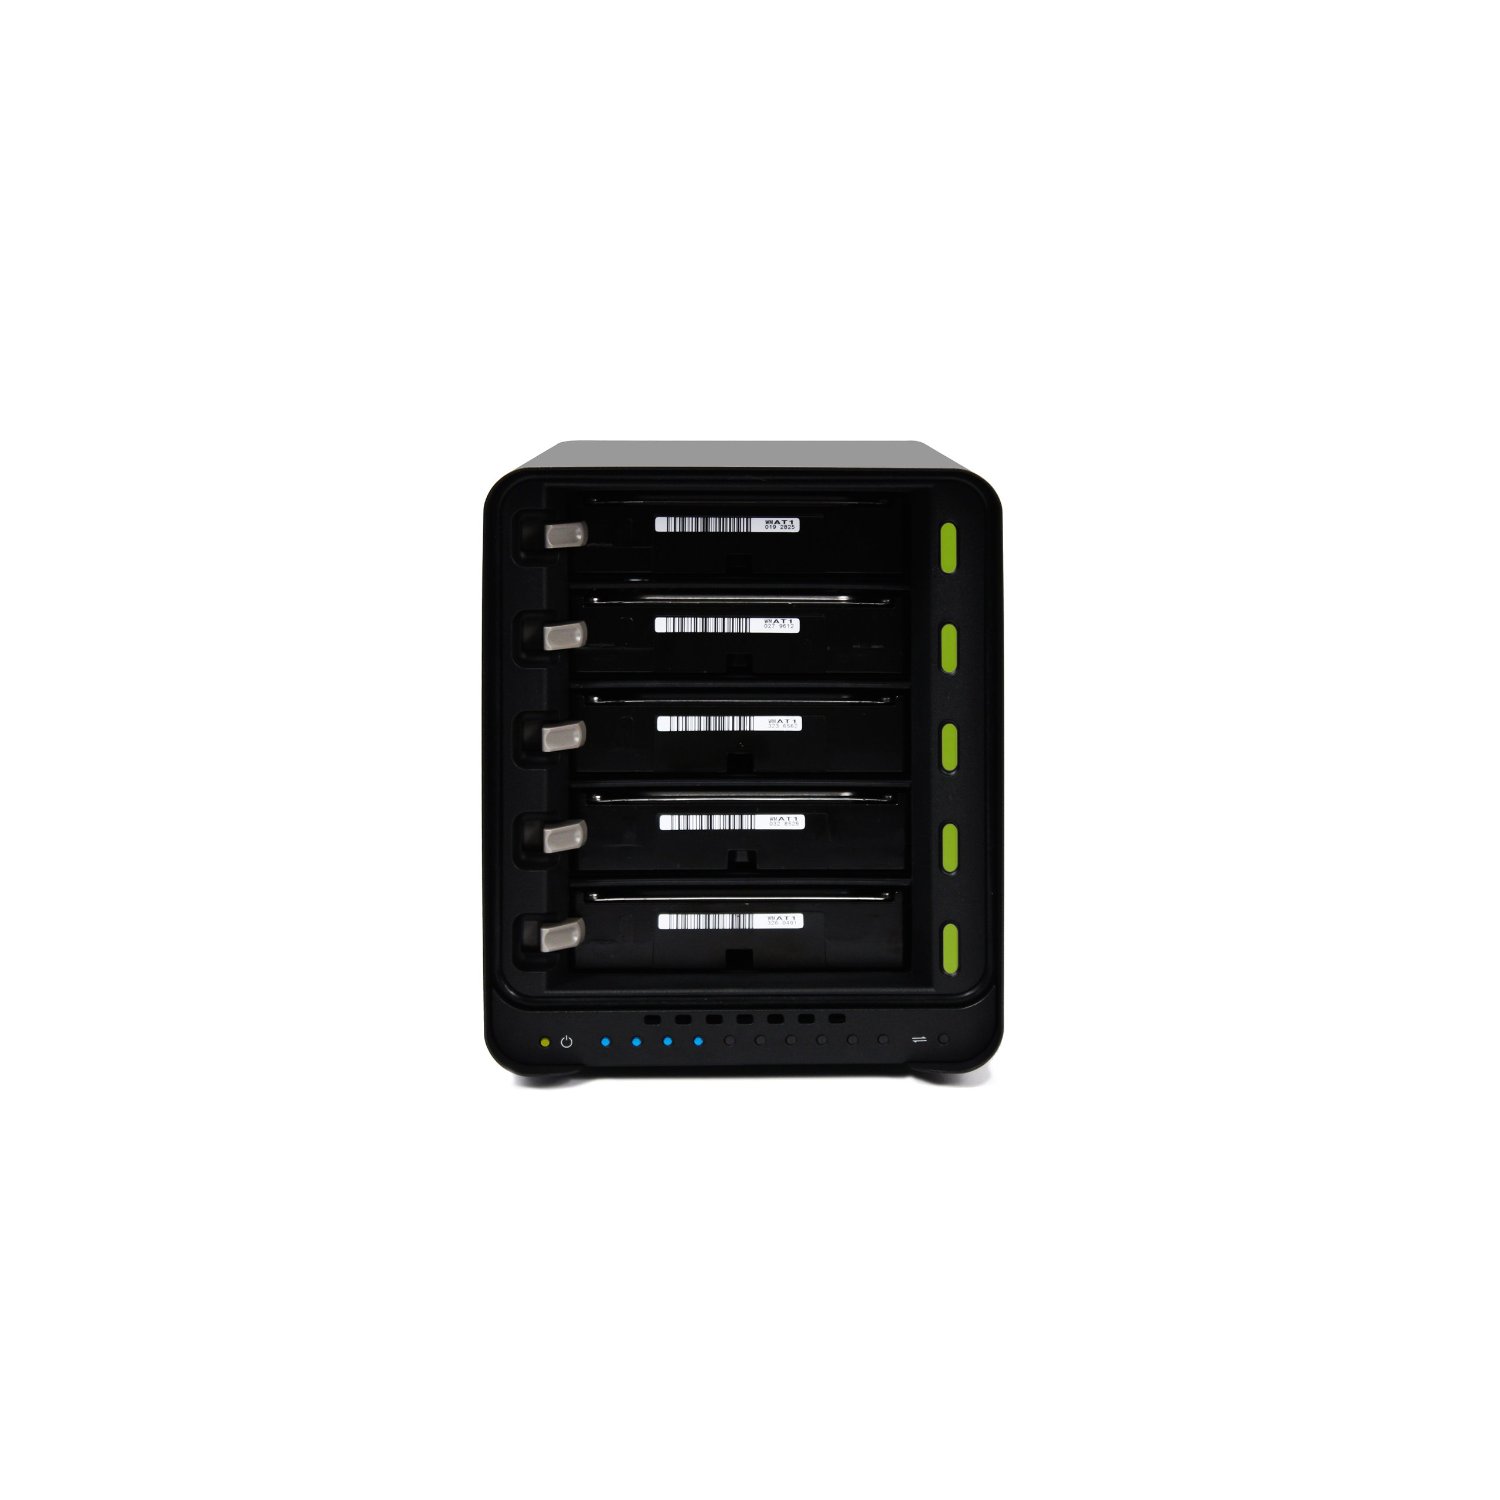 http://thetechjournal.com/wp-content/uploads/images/1110/1320063726-drobo-fs-5bay-gbe-storage-array-3.jpg